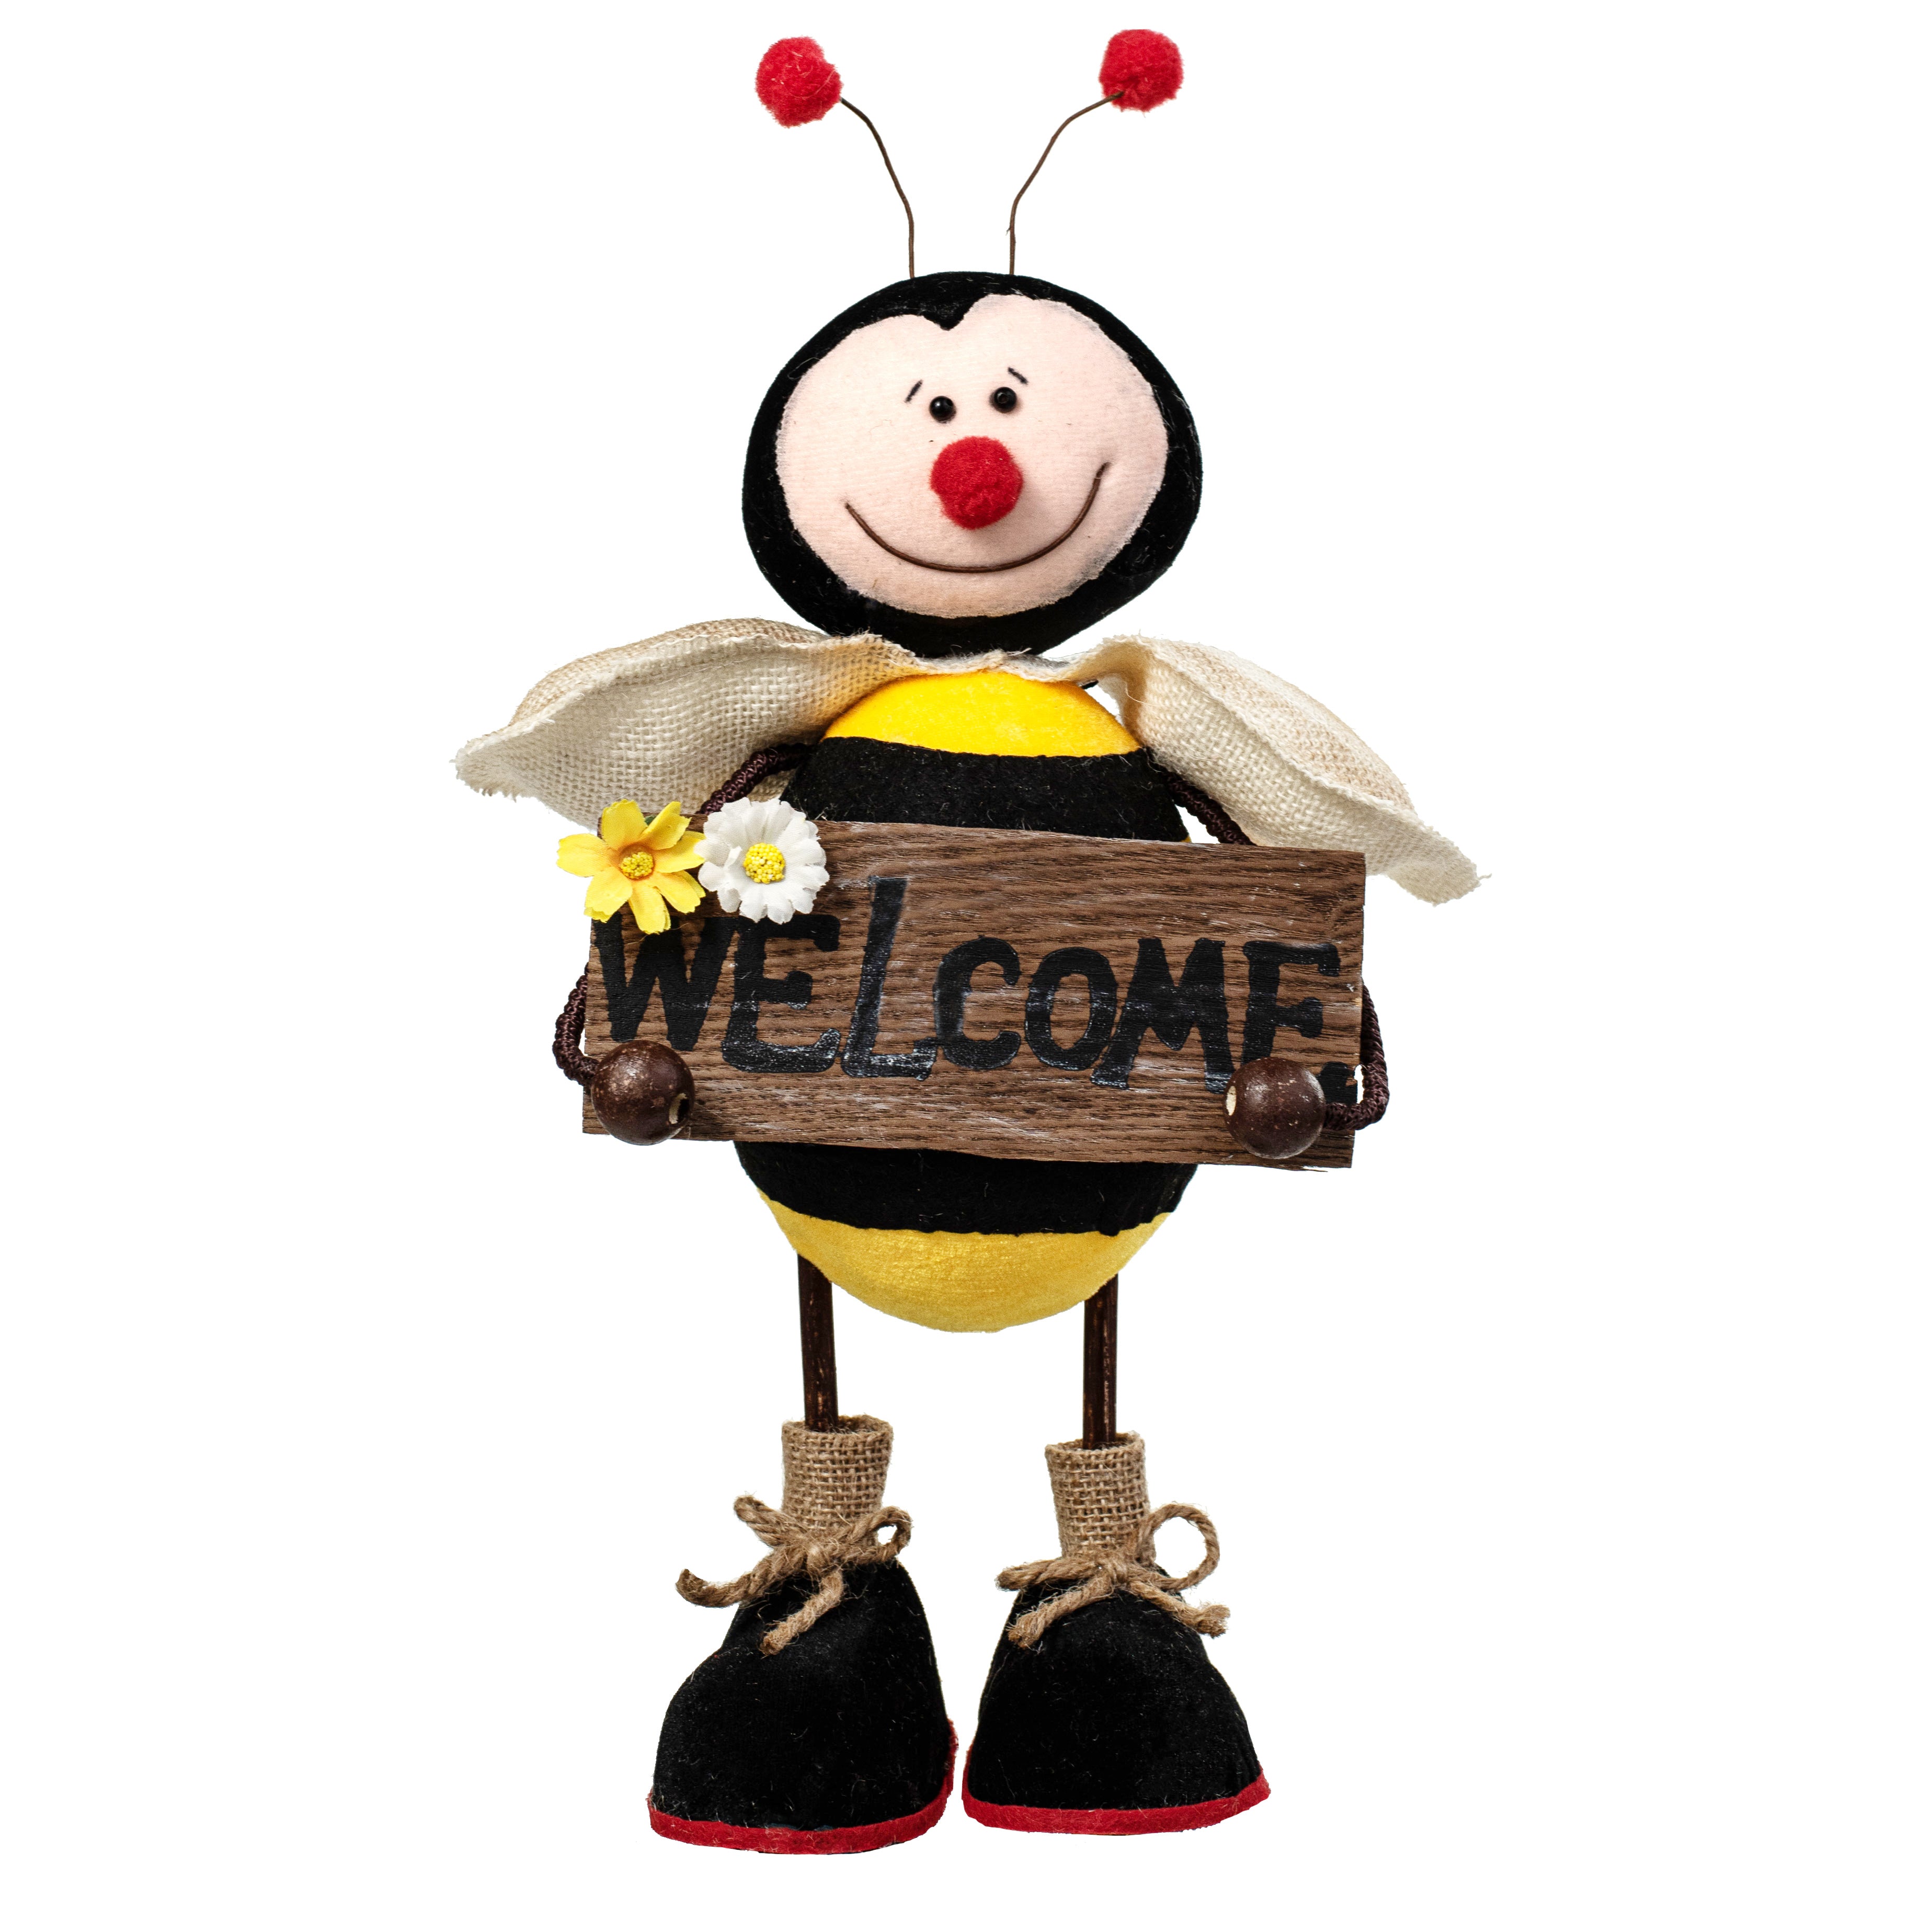 13" Standing Bee With Welcome Sign